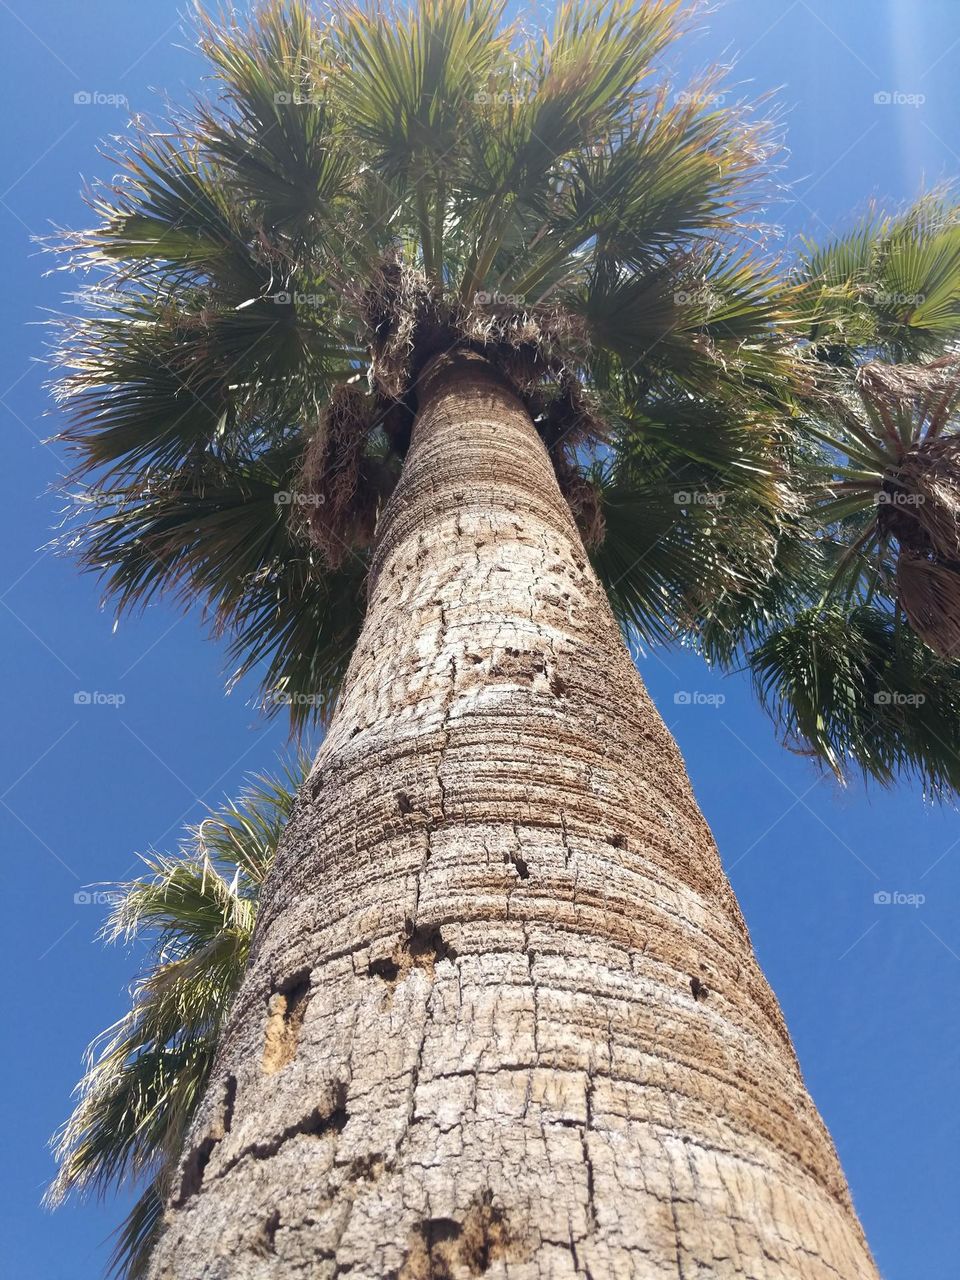 Another tall palm tree